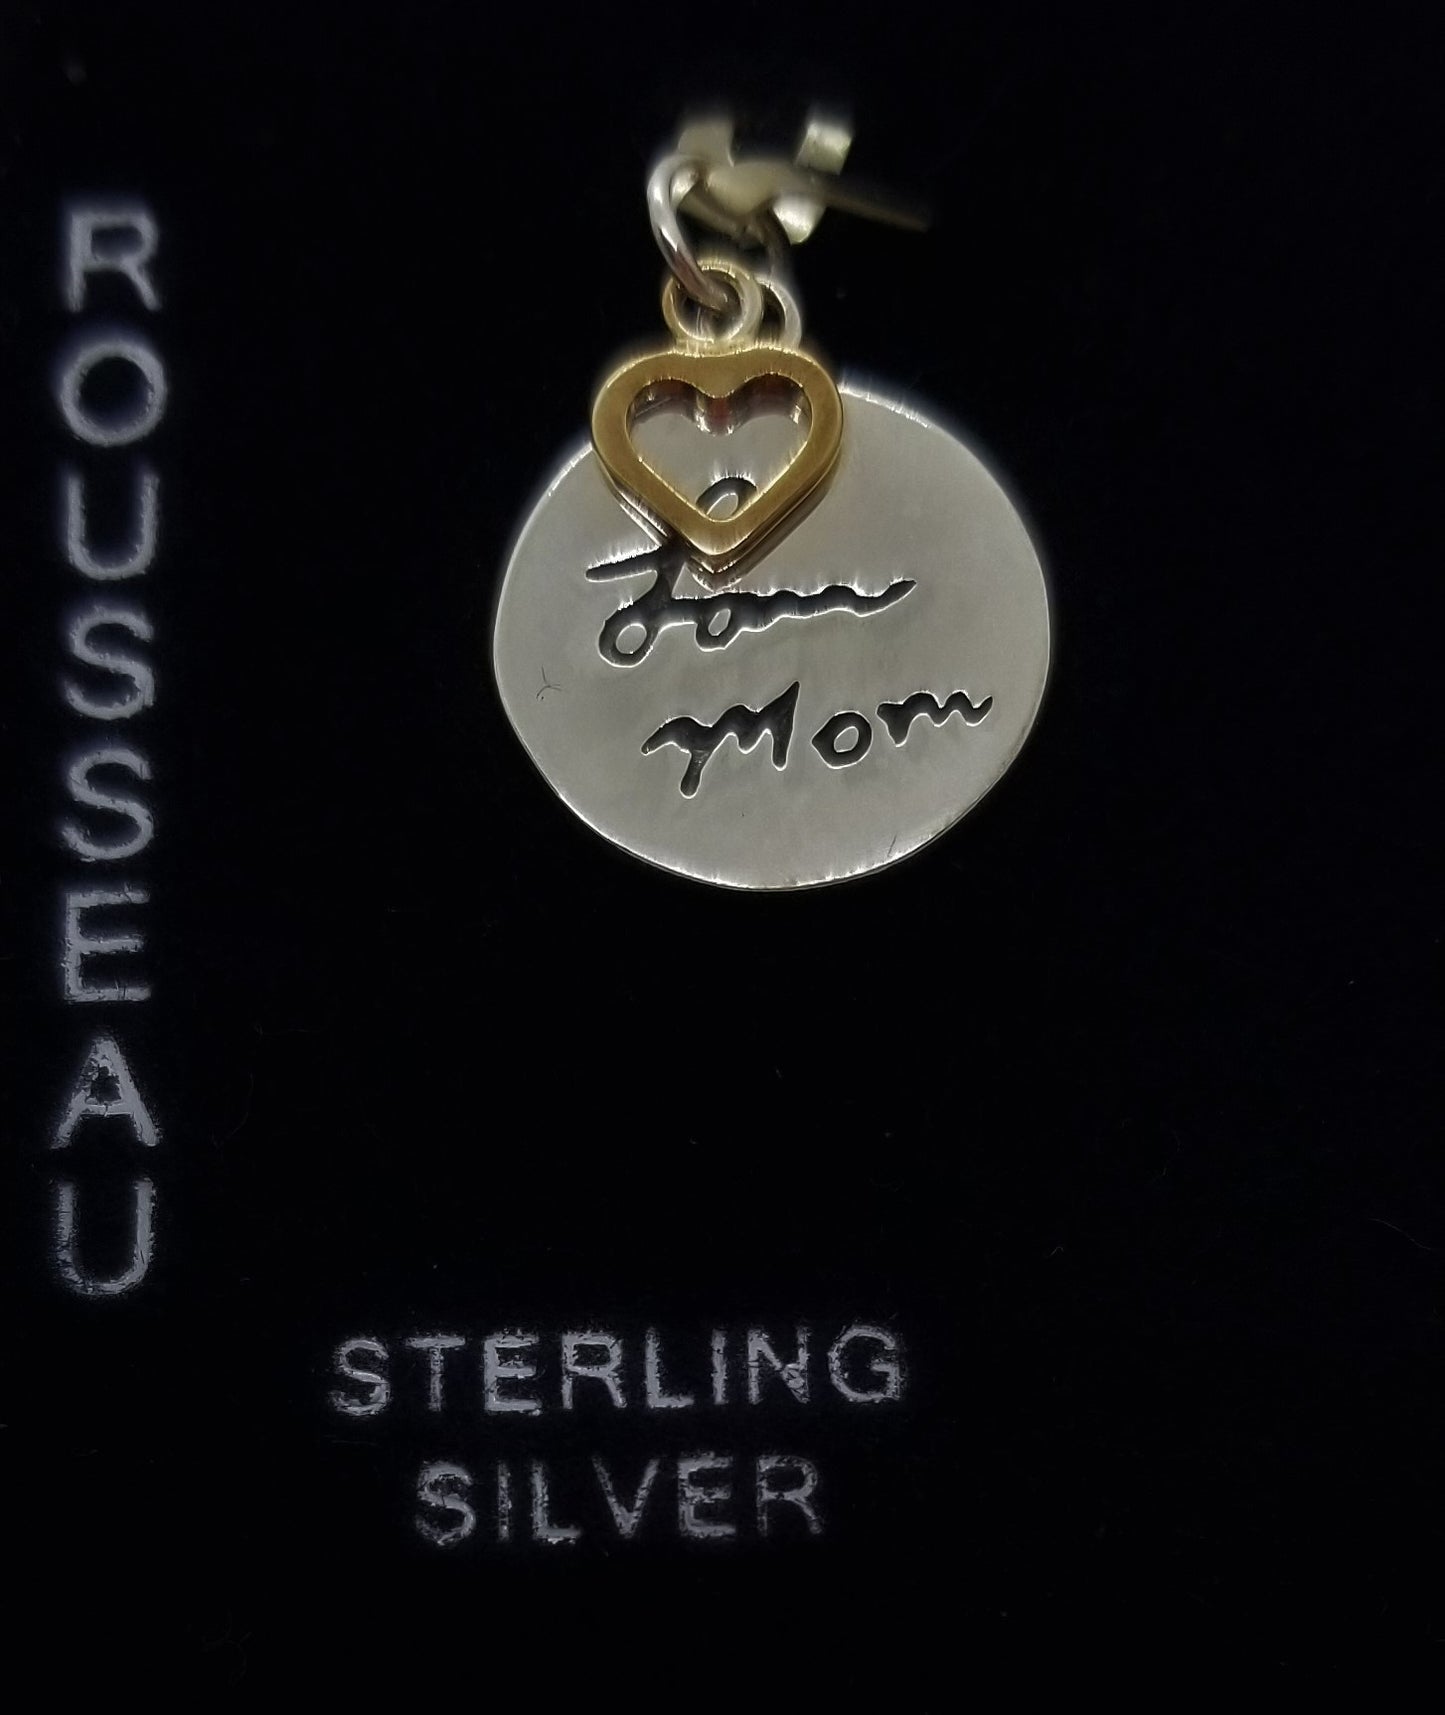 Rousseau 925 sterling silver Love Mom pendant with gold plated heart